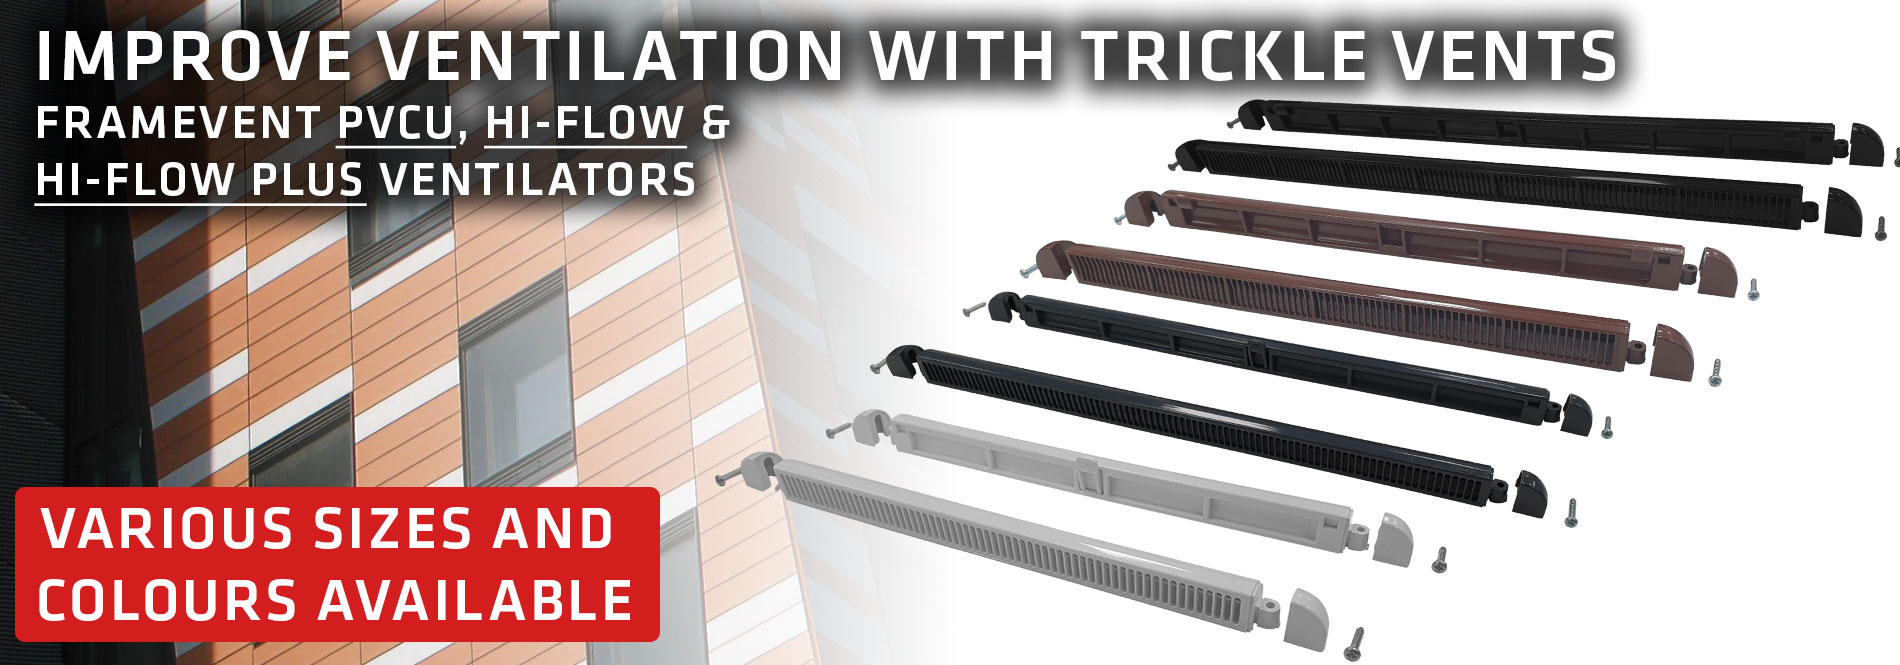 Improve Ventilation With Trickle Vents - browse the range today